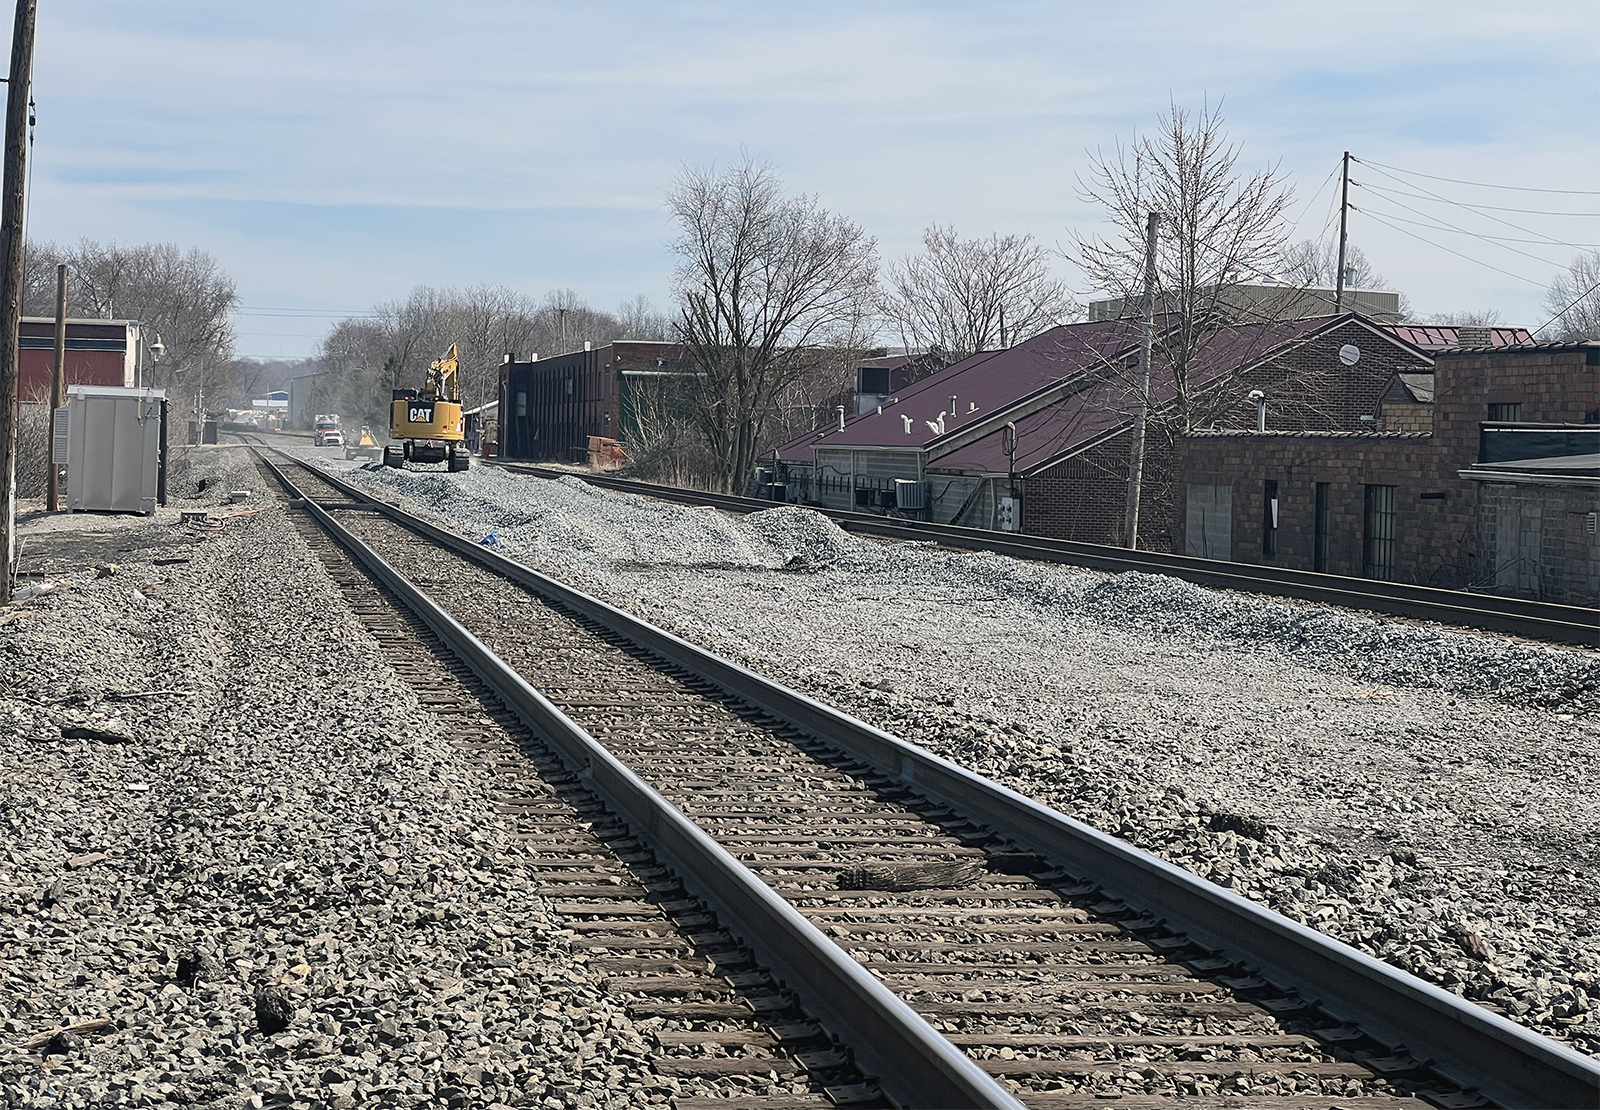 Crews work on rail lines in East Palestine, Ohio, on Tuesday, March 21, 2023. RNS photo by Kathryn Post